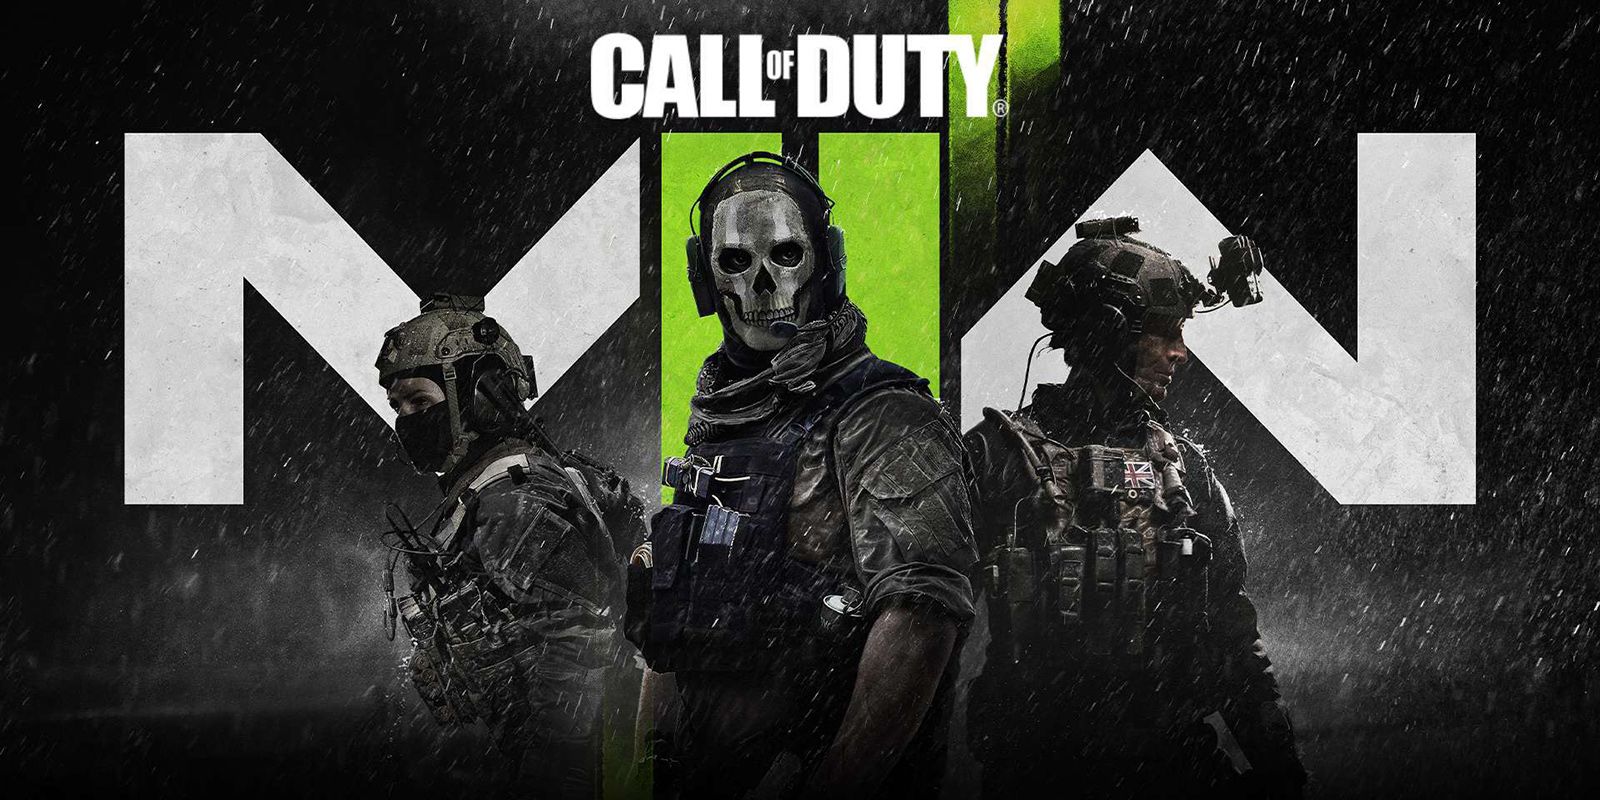 Call of Duty 2022 Campaign Details Leaked: Morality system, Modern Warfare 2,  and more